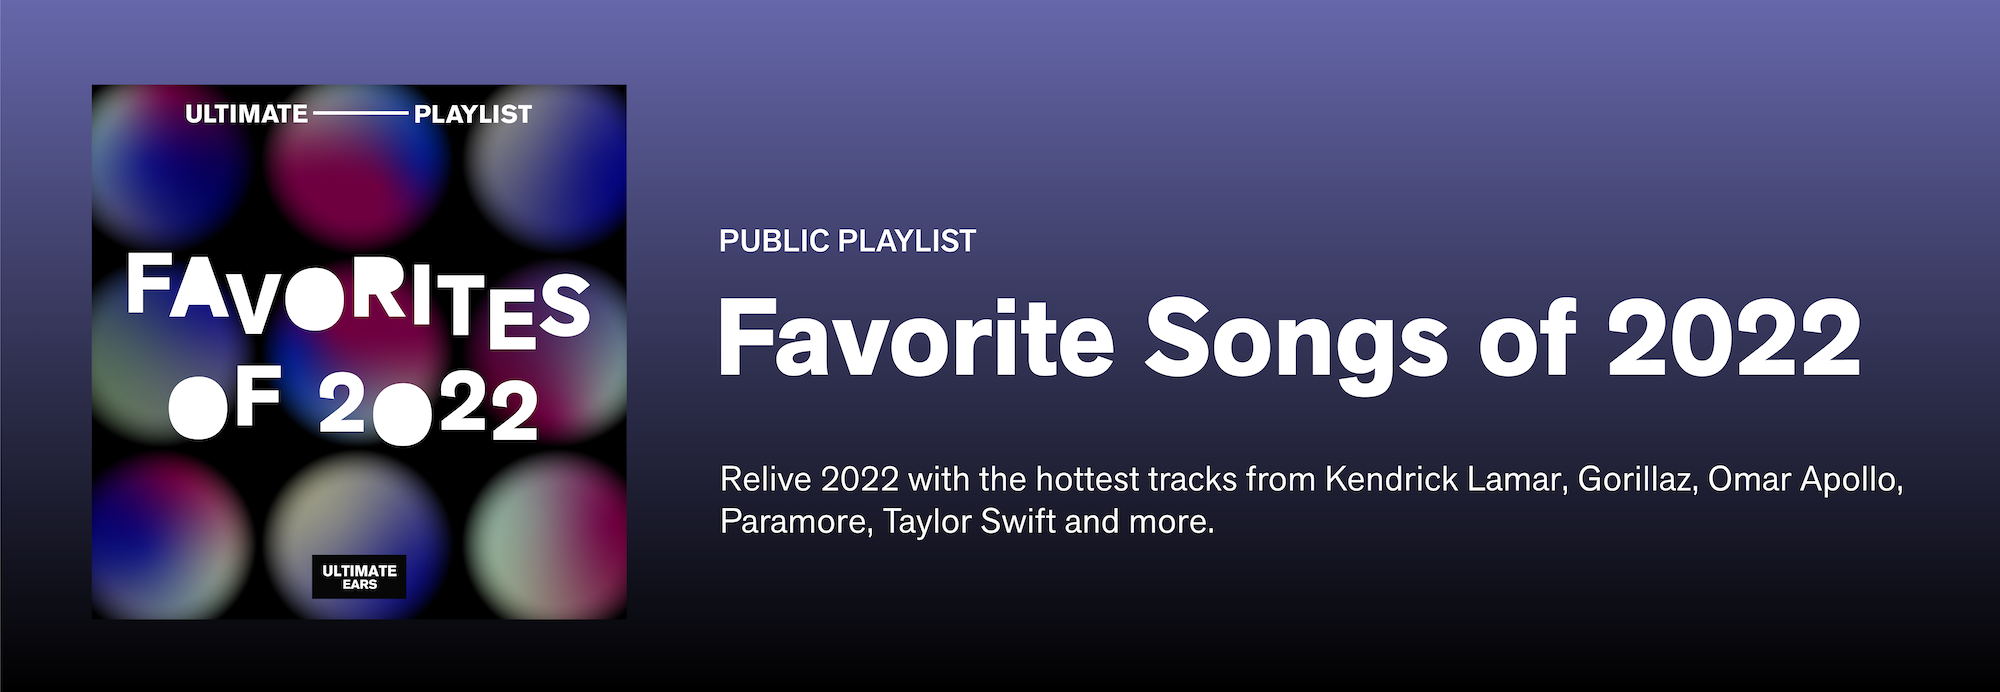 Playlist: Our Favorite Songs of 2022